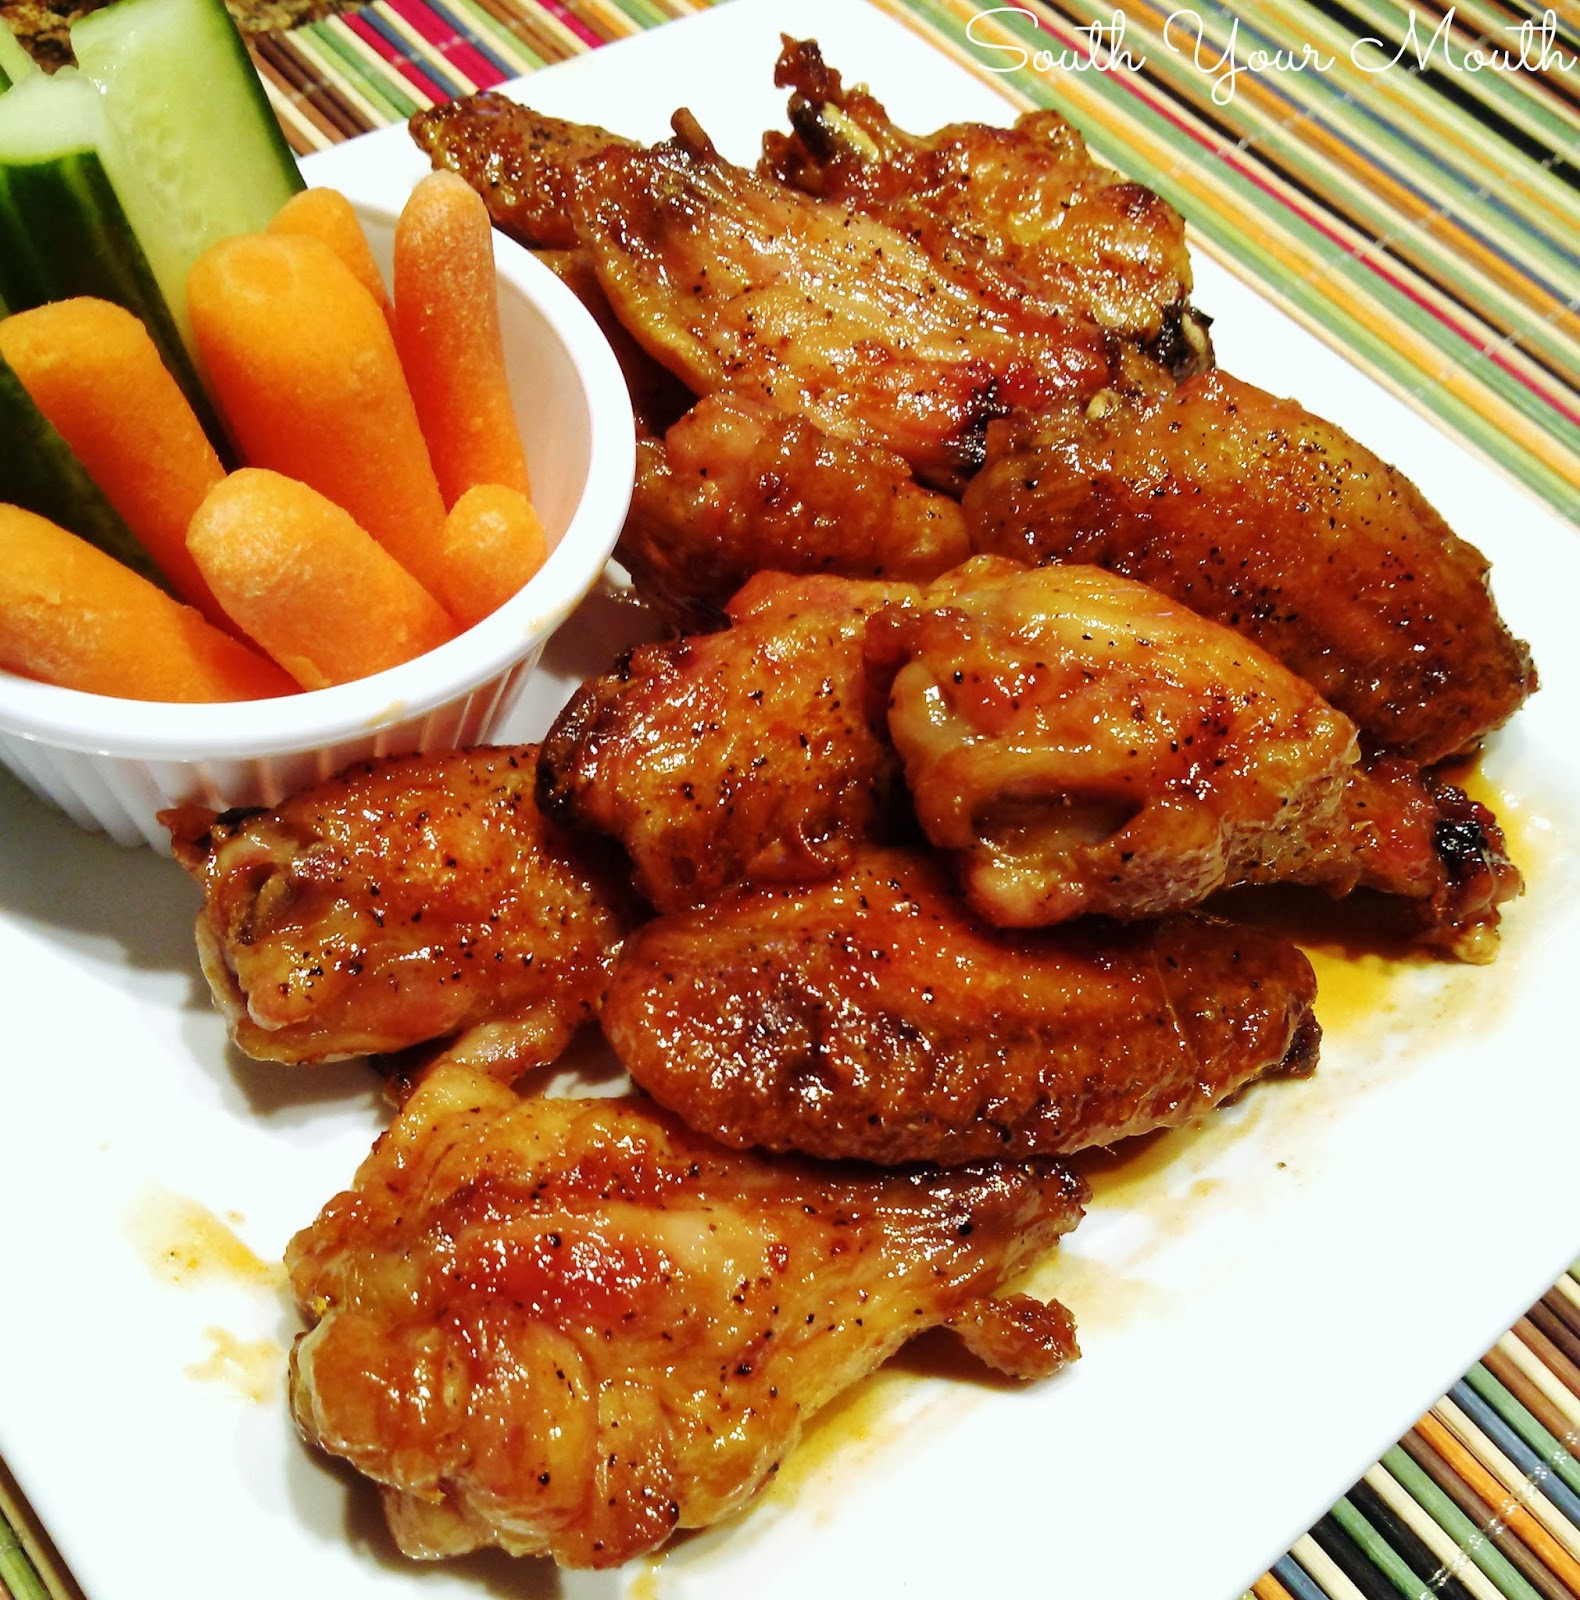 Baked Crispy Chicken Wings
 South Your Mouth Crispy Baked Chicken Wings with Sweet